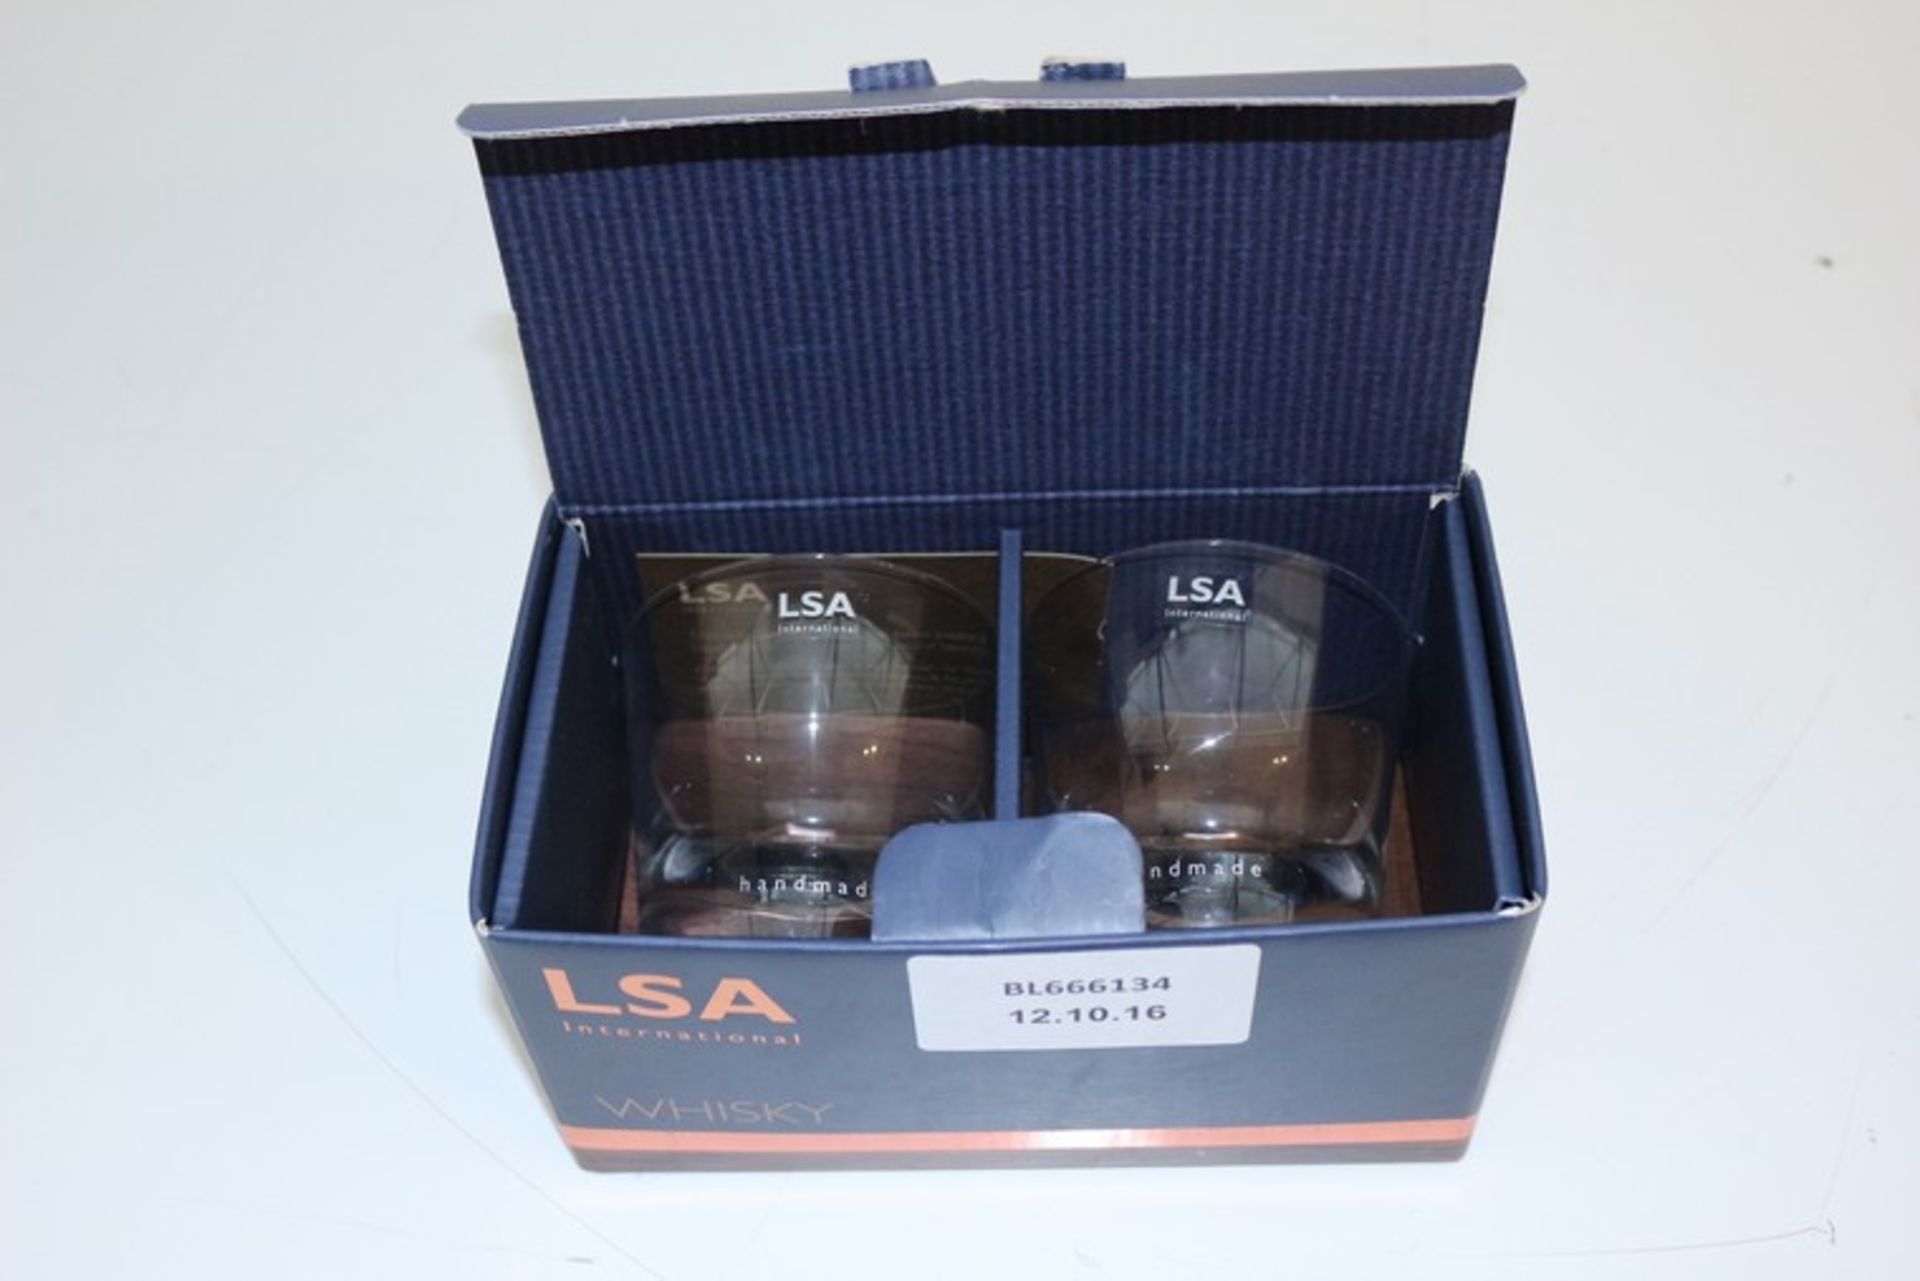 2 x BOXED ASSORTED ITEMS TO INCLUDE LSA AURELIA CHAMPAIGN FLUTES AND WHISKY GLASSES *PLEASE NOTE